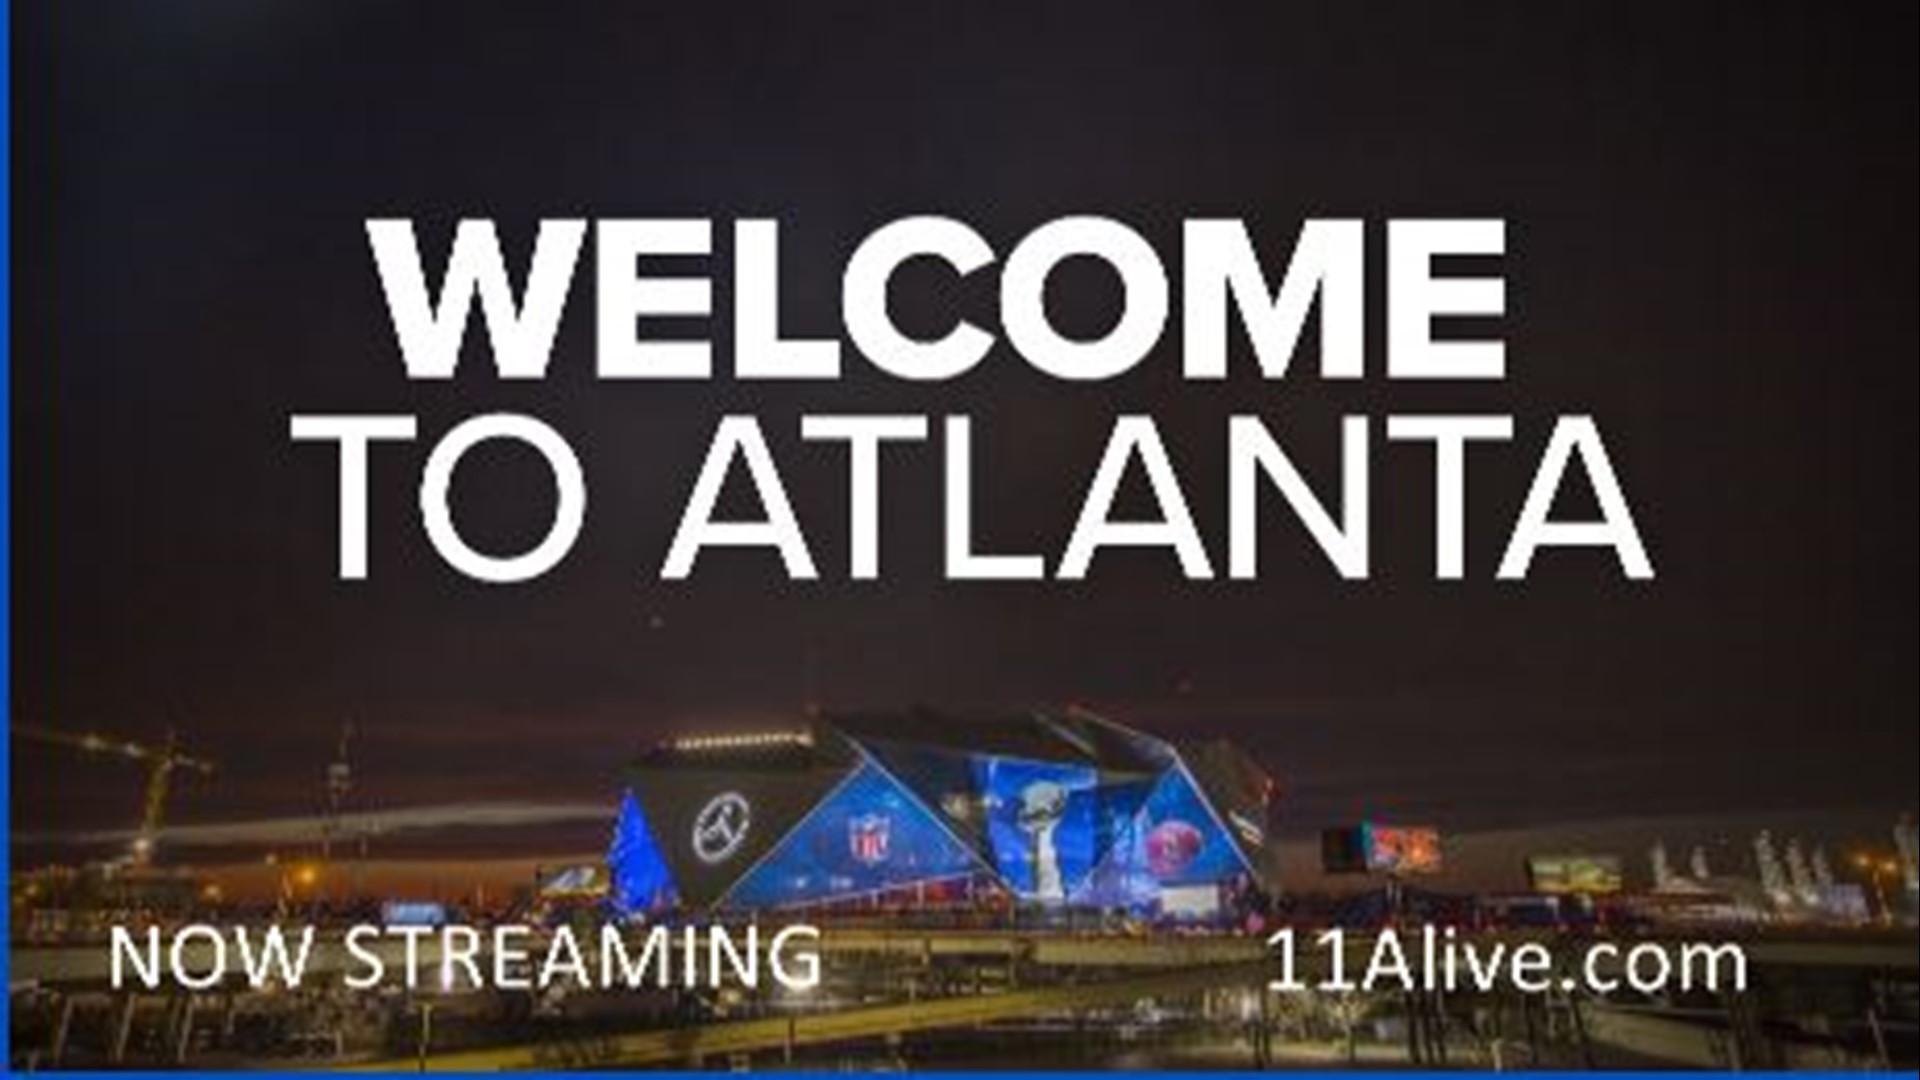 Welcome to Atlanta.  For seven days the ATL is the intersection of sports, celebrity and Southern hospitality as more than one million people roll into town for Super Bowl LIII.  This is your day by day countdown as red carpets, Cola Wars, NFL legends and the biggest football game in the world get a taste of the A.